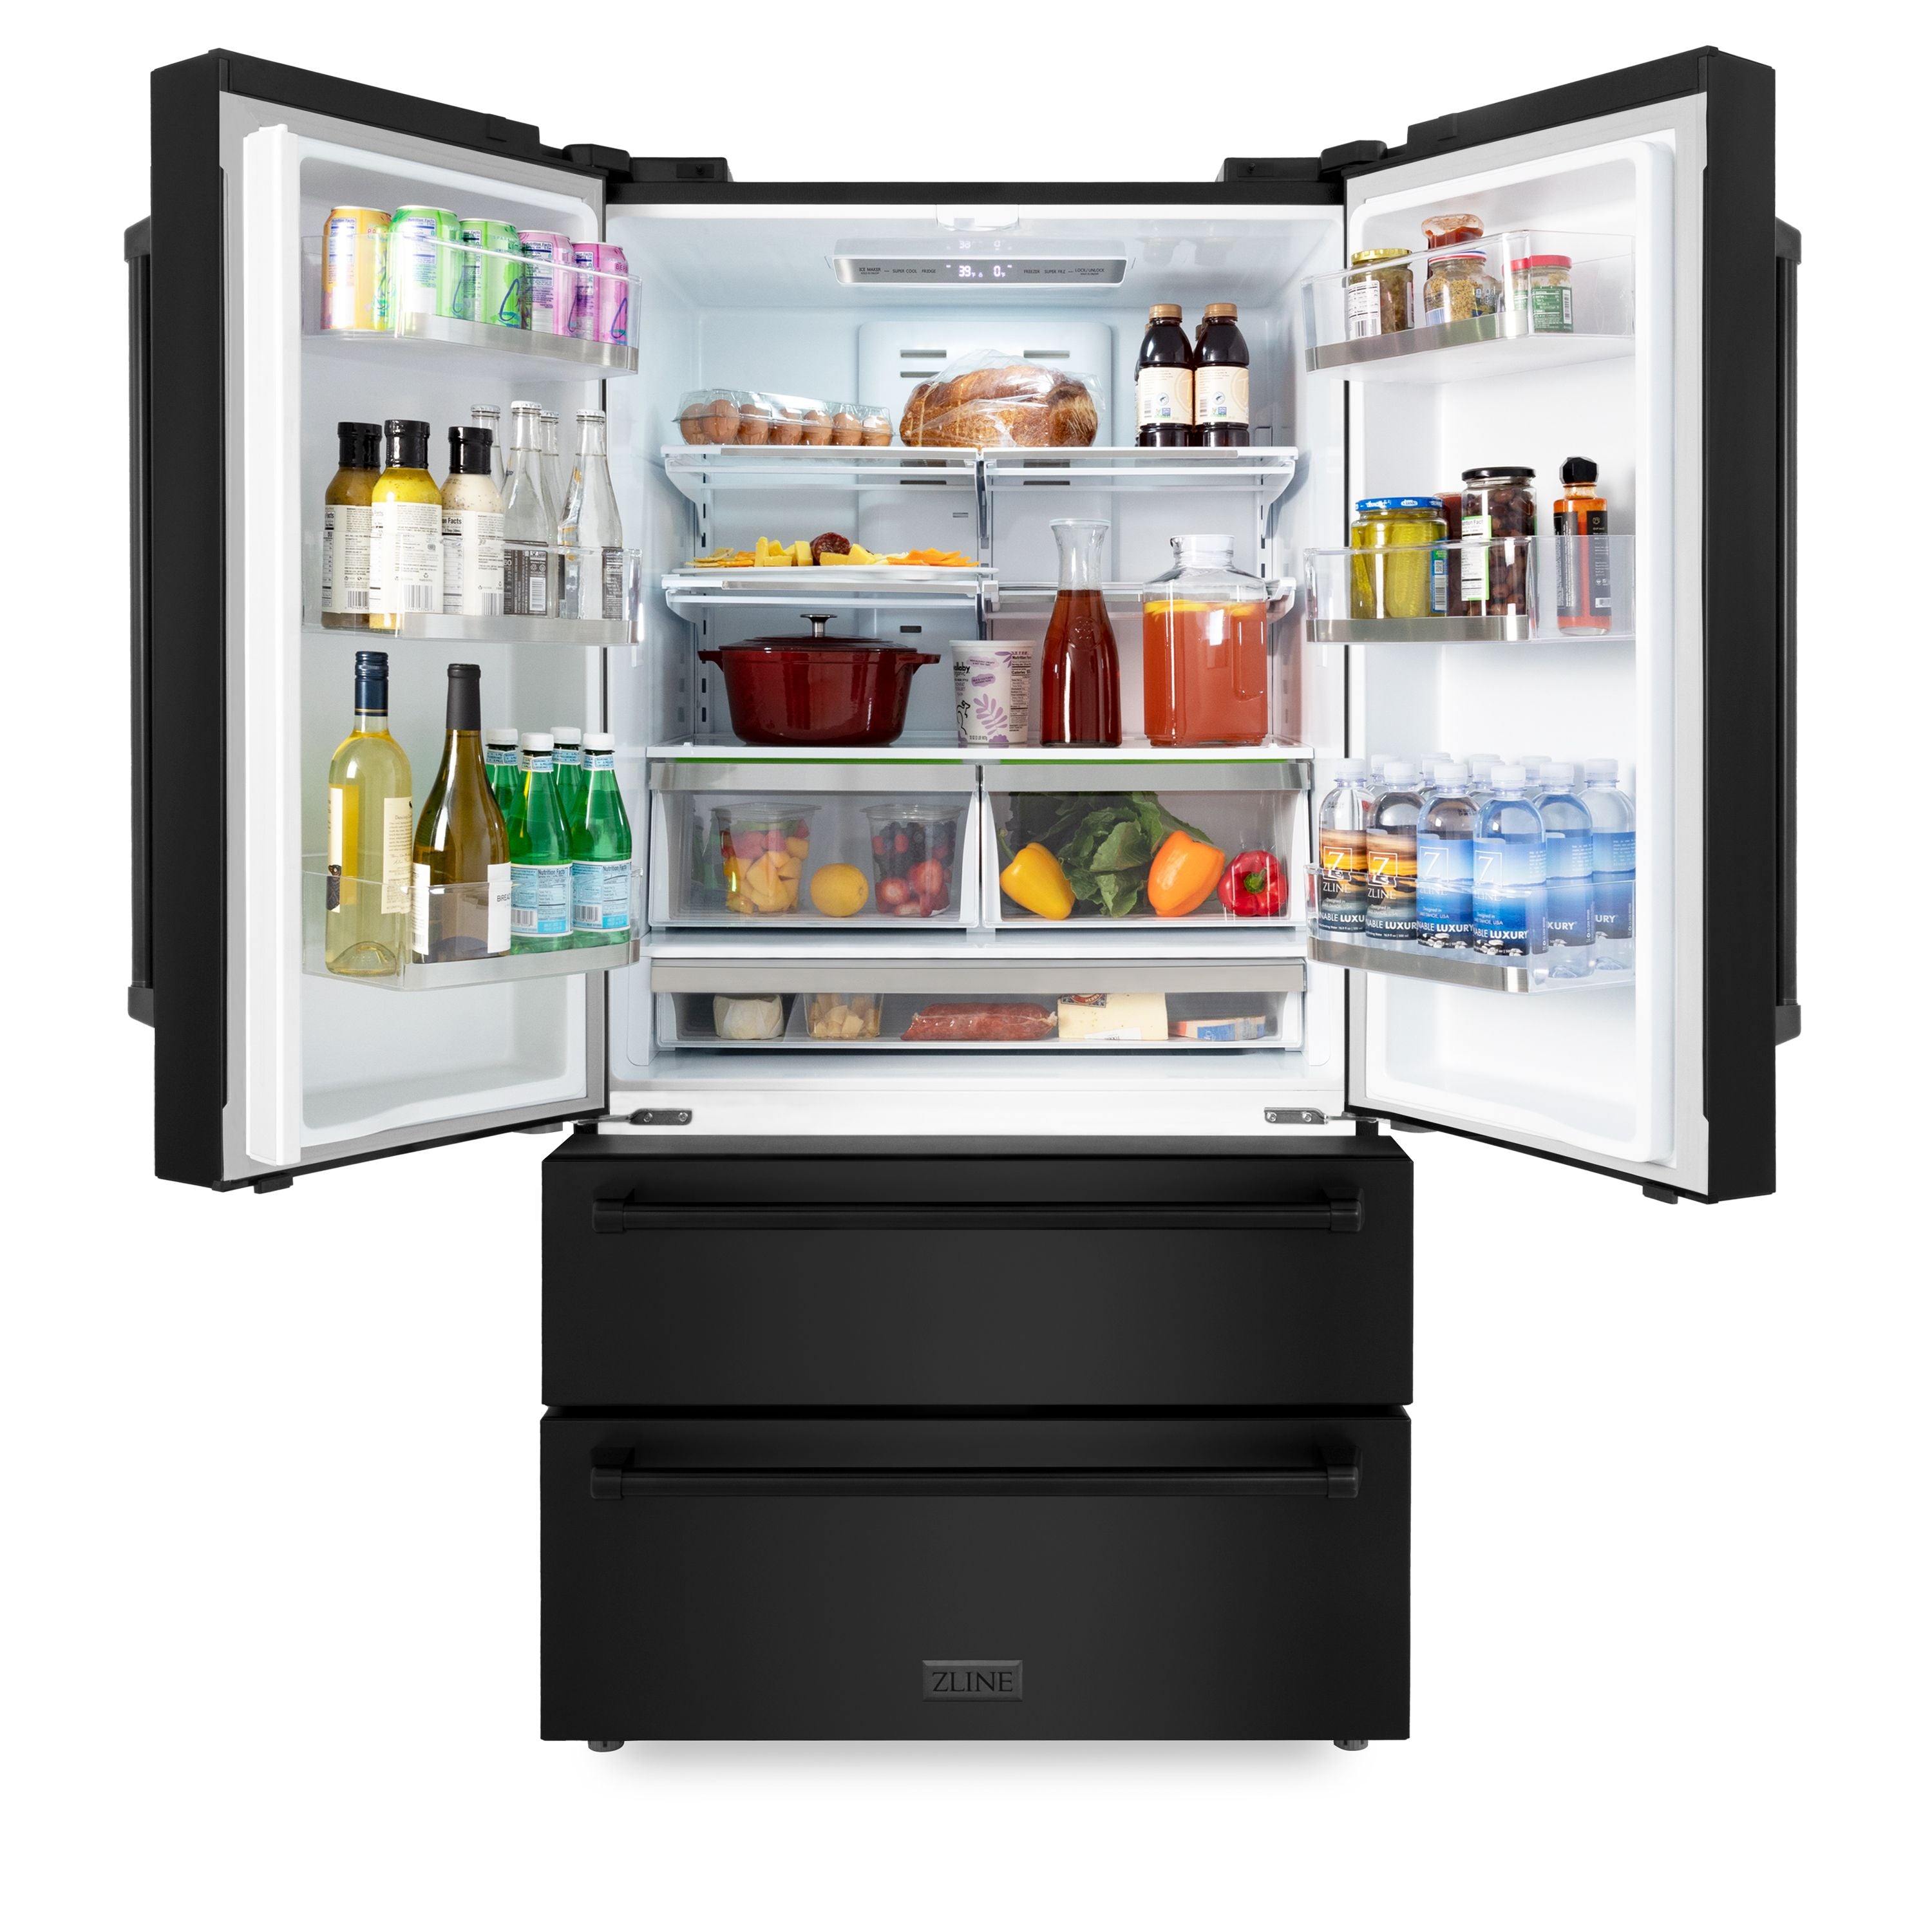 ZLINE 36 inch 22.5 cu. ft. French Door Refrigerator with Ice Maker in Black Stainless Steel 3